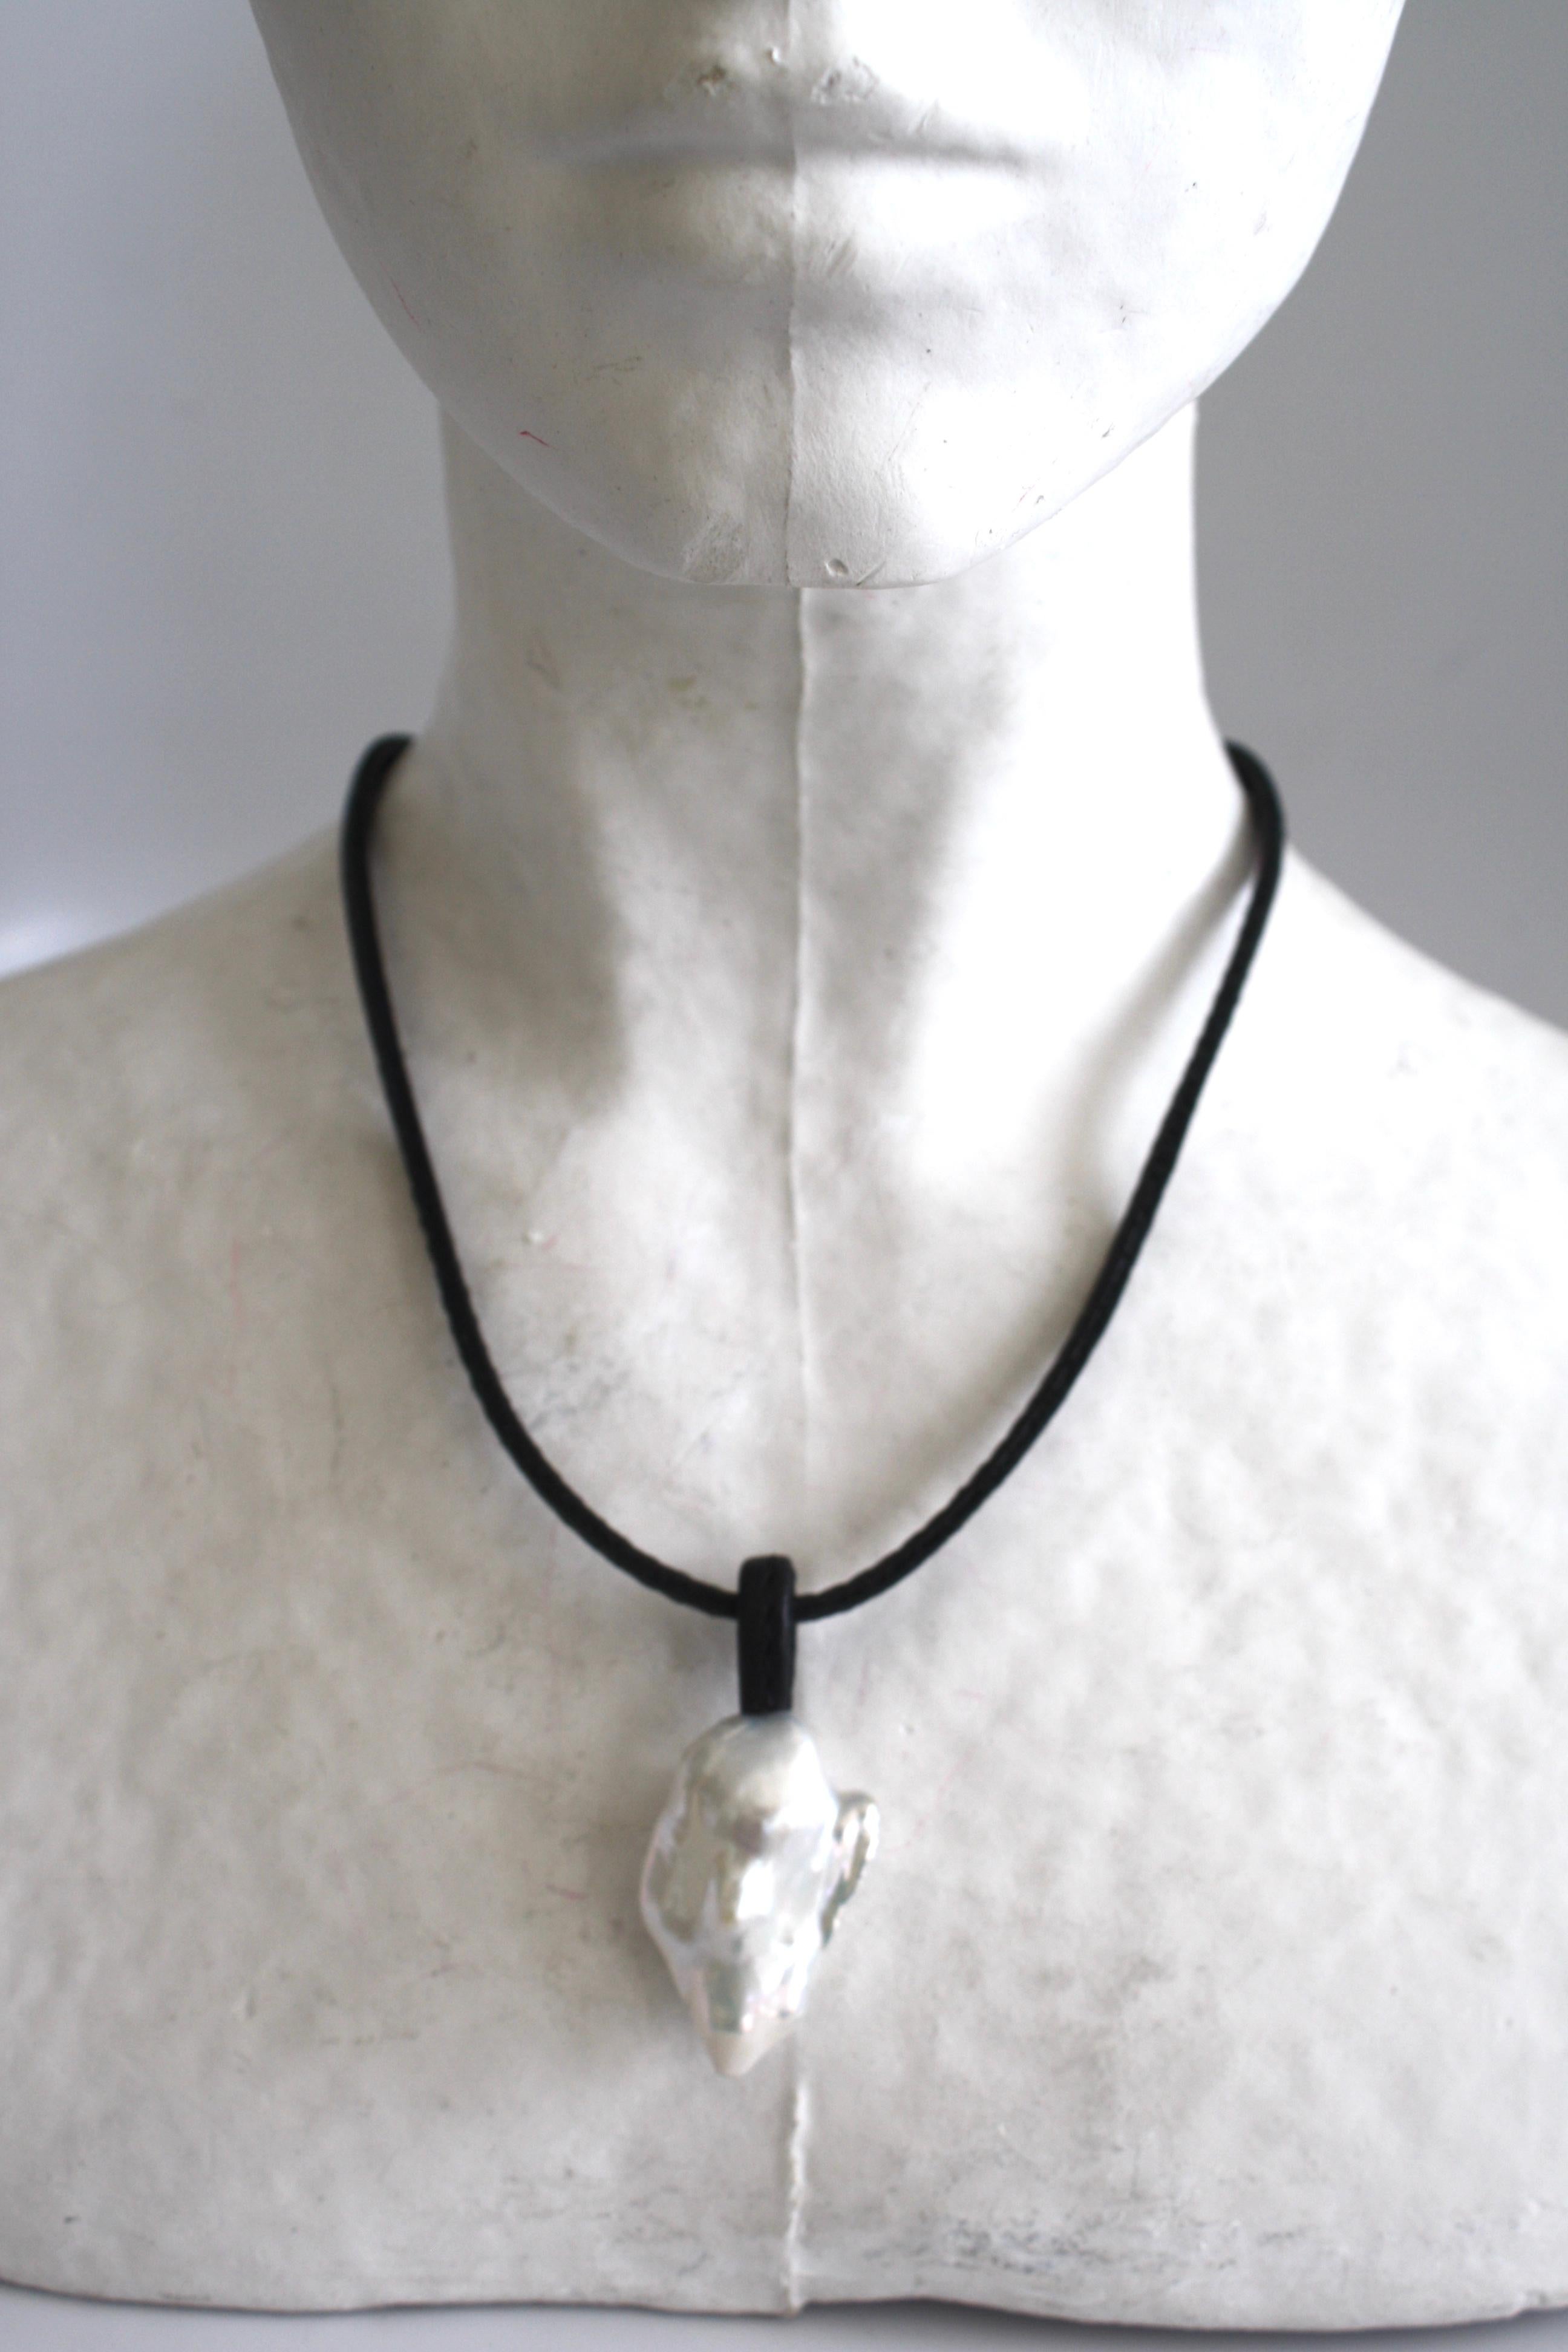 Leather strand with baroque pearl pendant from Monies.  Pearl is 1.5